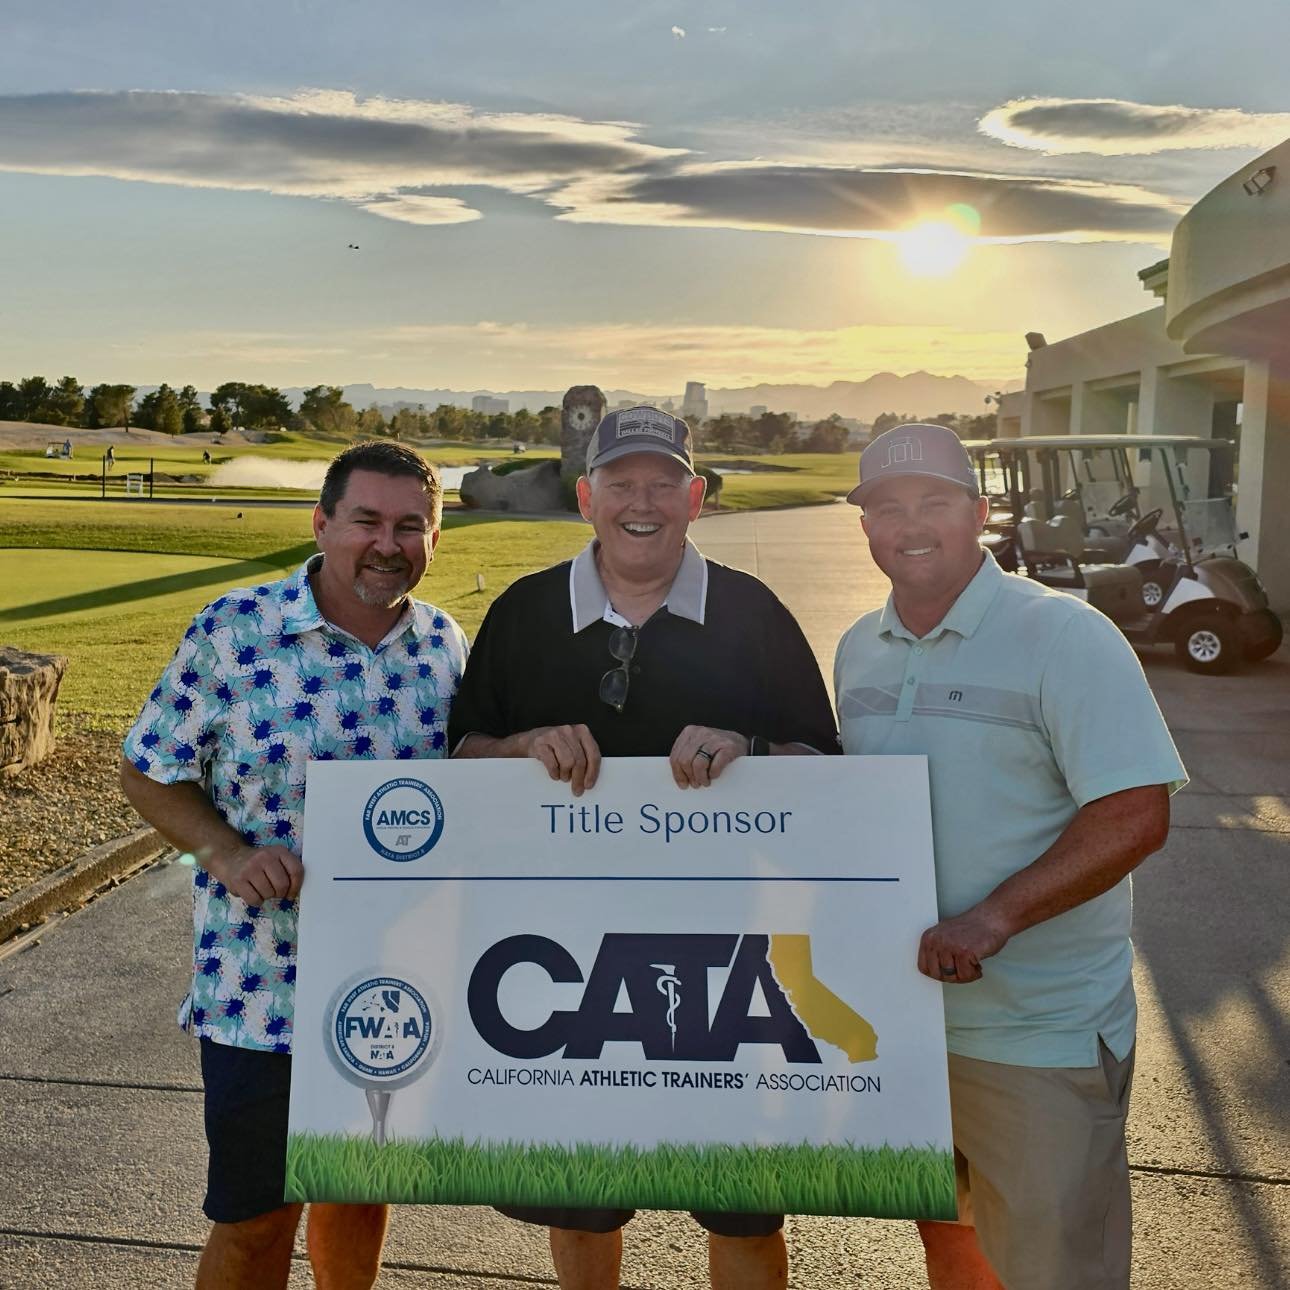 Congratulations to the defending champions 🏆 of the FWATA Paul Schechter Memorial Scholarship Golf Tournament! CATA Region 5 Director Todd Conger, President Ky Kugler, and Region 4 Director Matt Quijano showcased their skills and tied for 1st place 